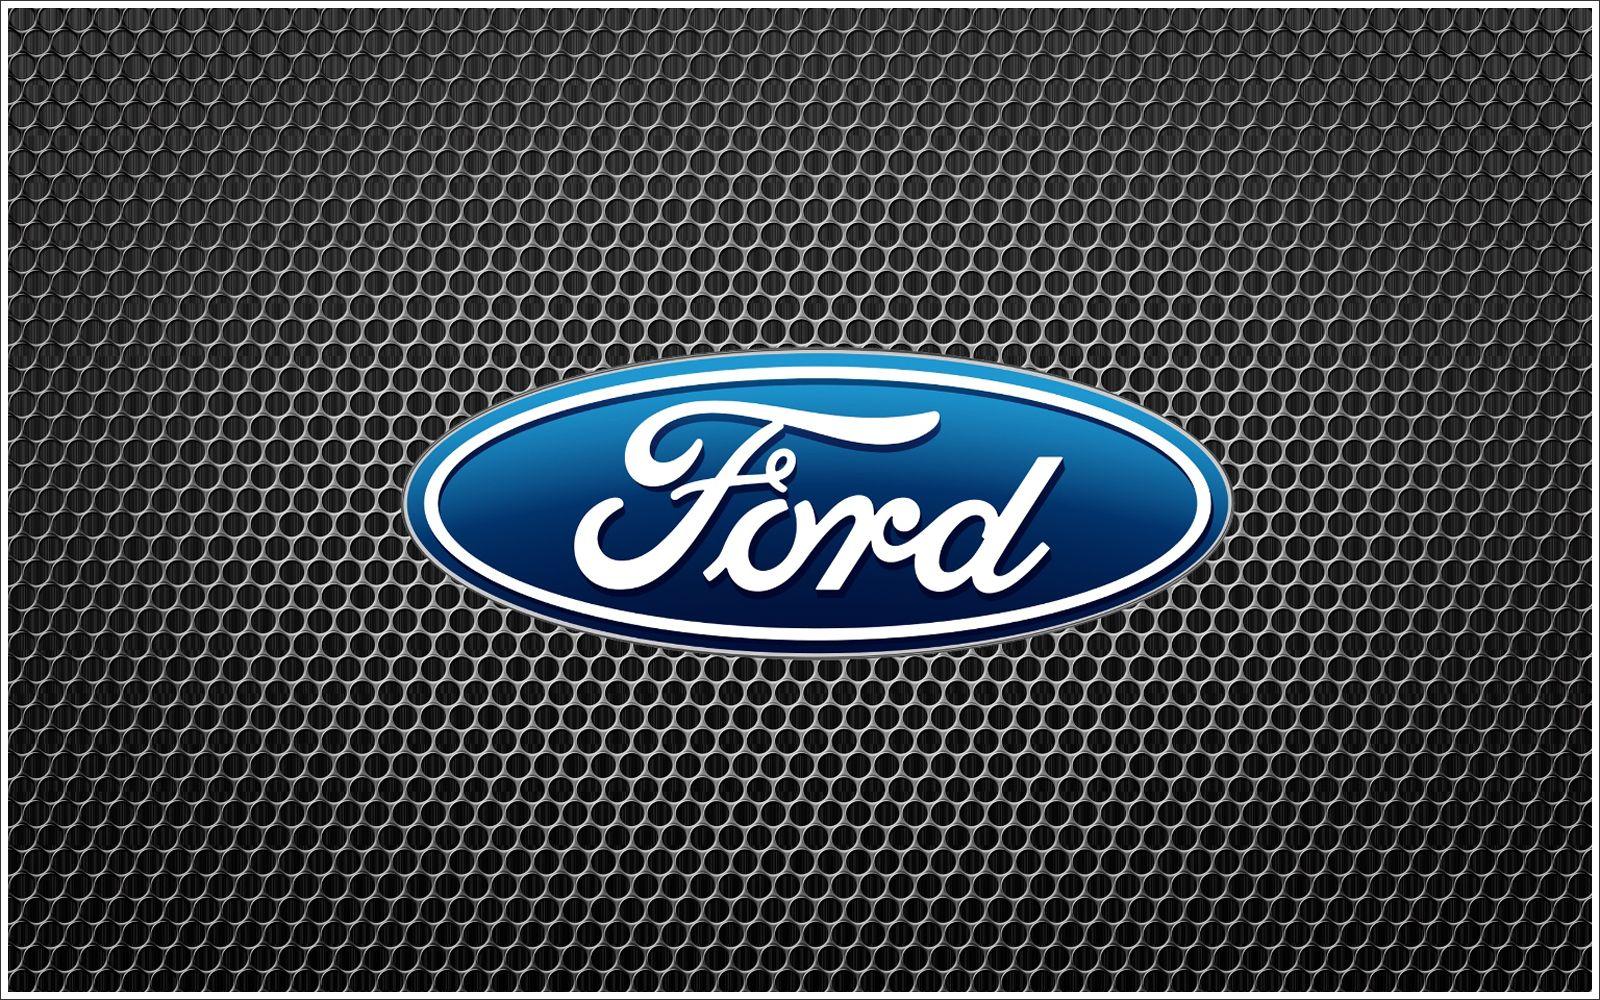 First Ford Logo - Ford Logo Meaning and History, latest models | World Cars Brands